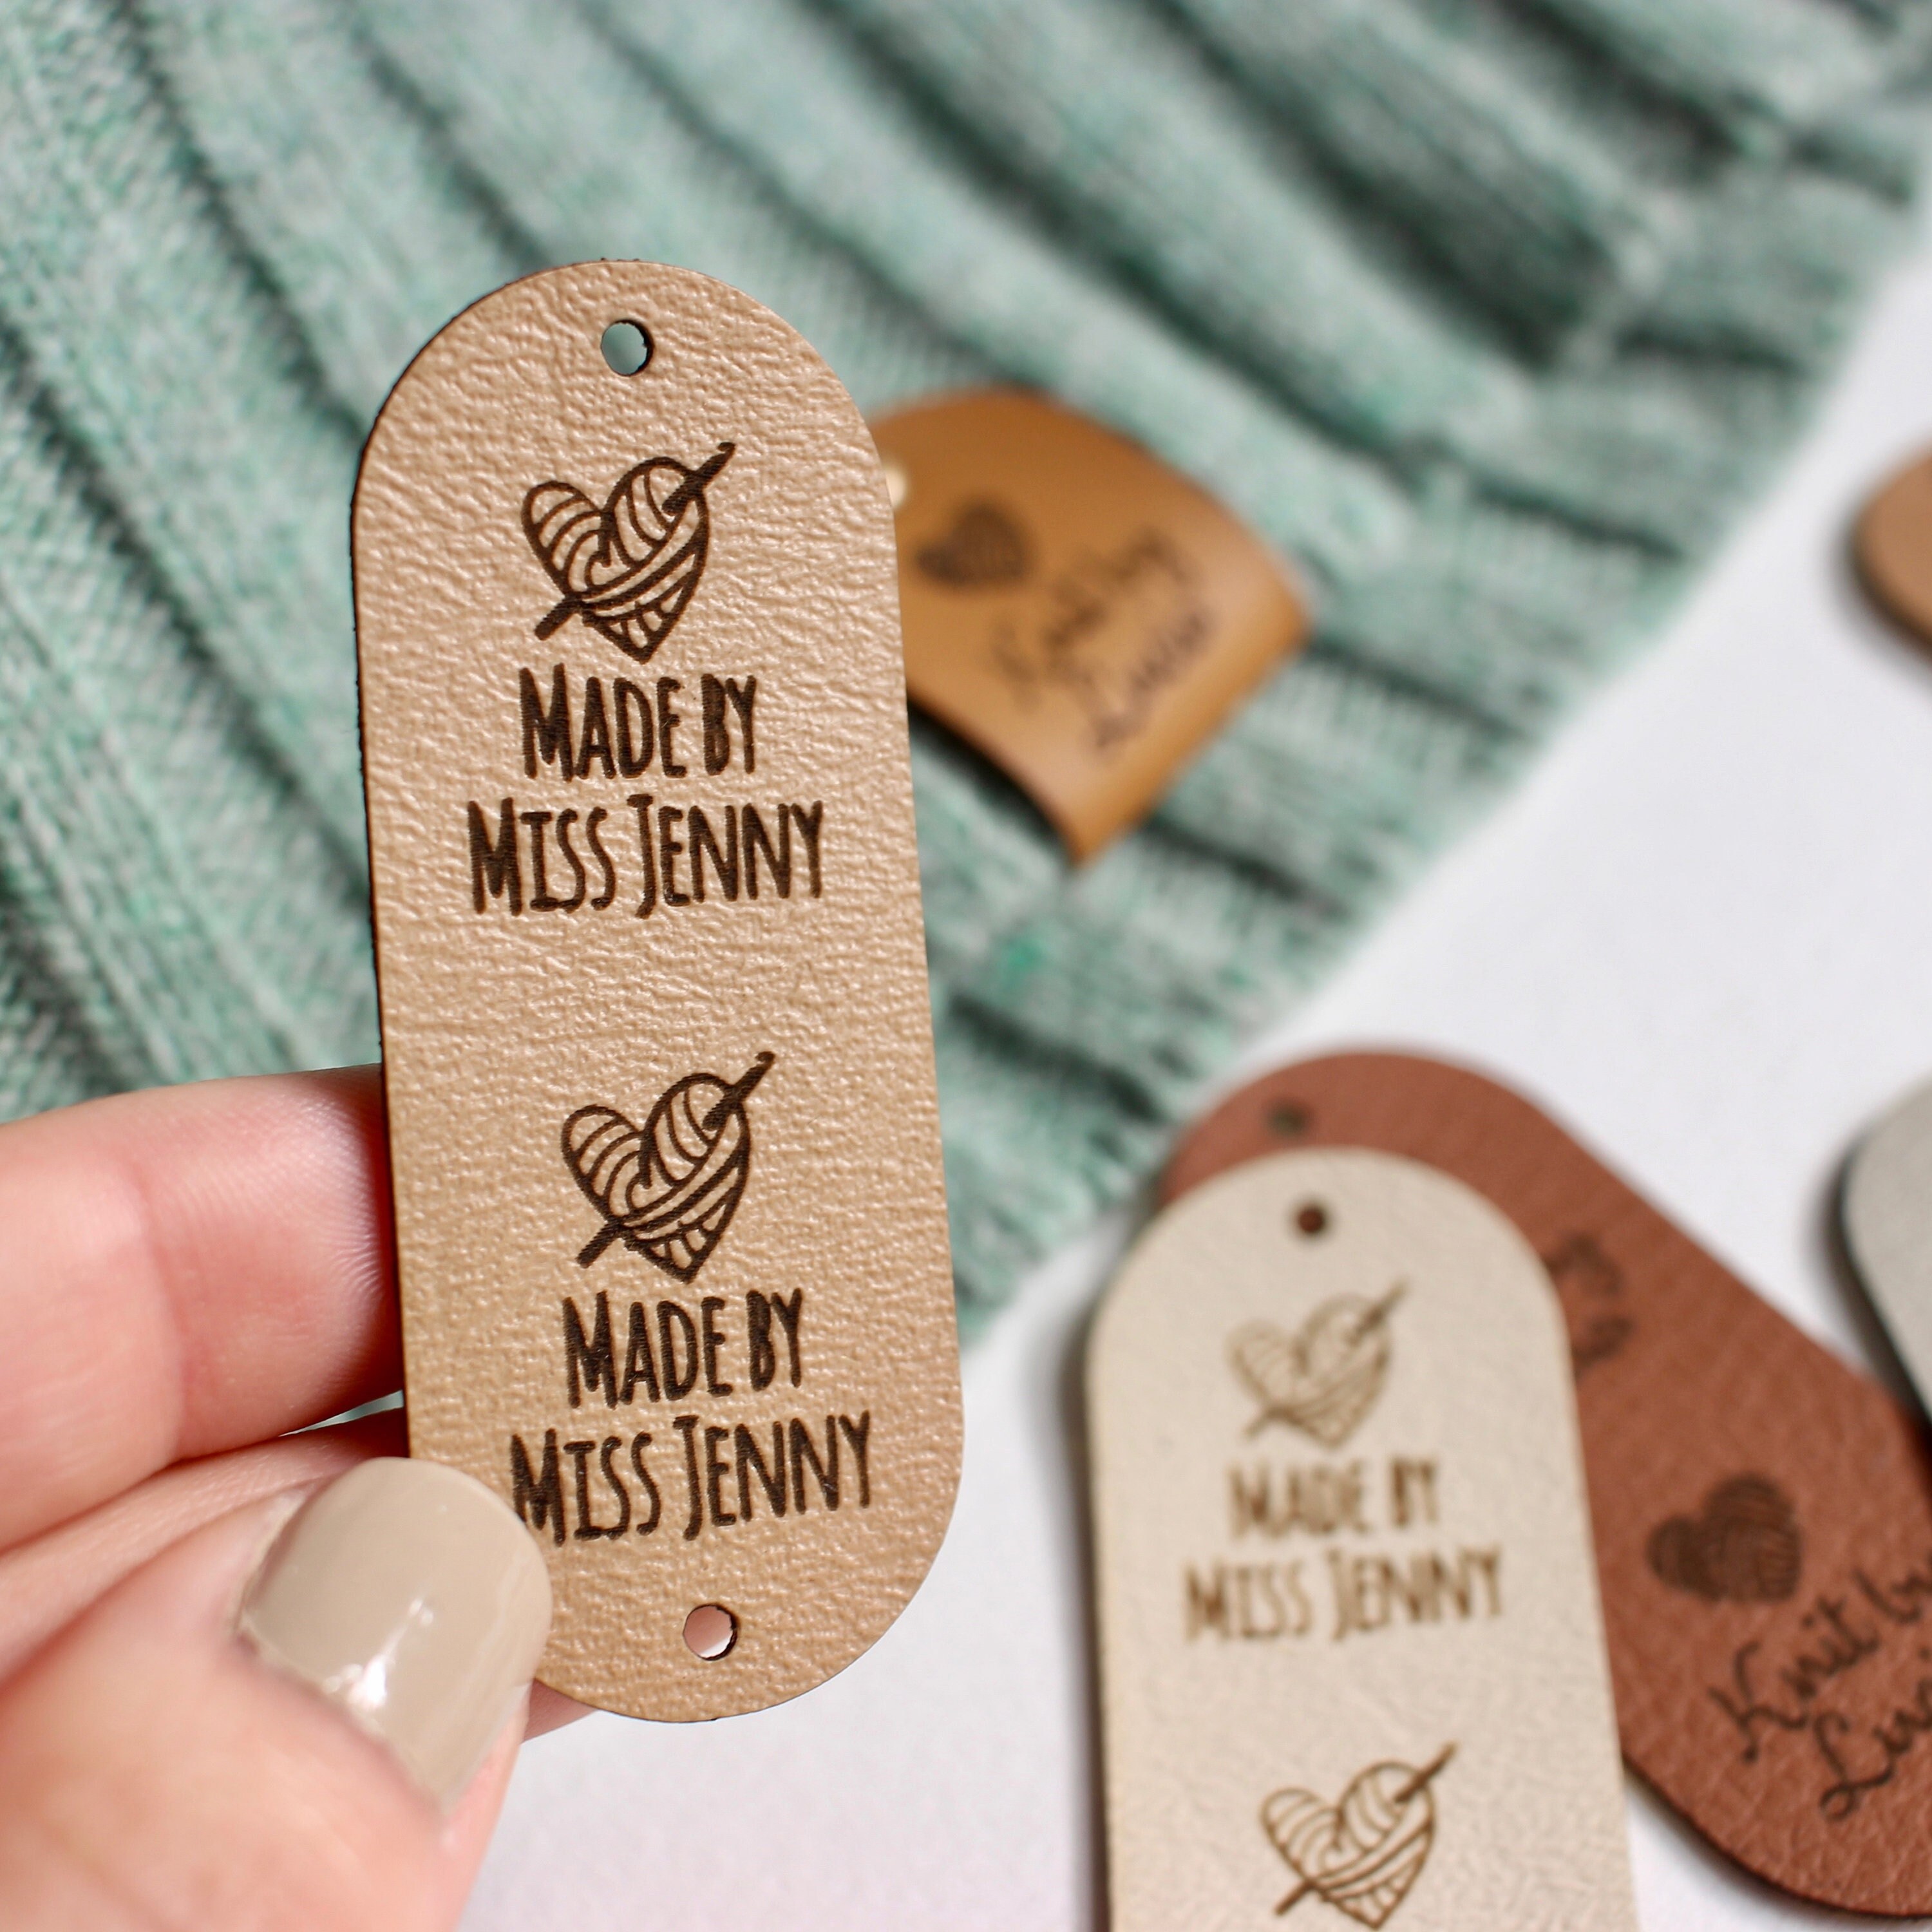 Personalized knitting tags with rivets - Easy to attach – Cutpie Studio